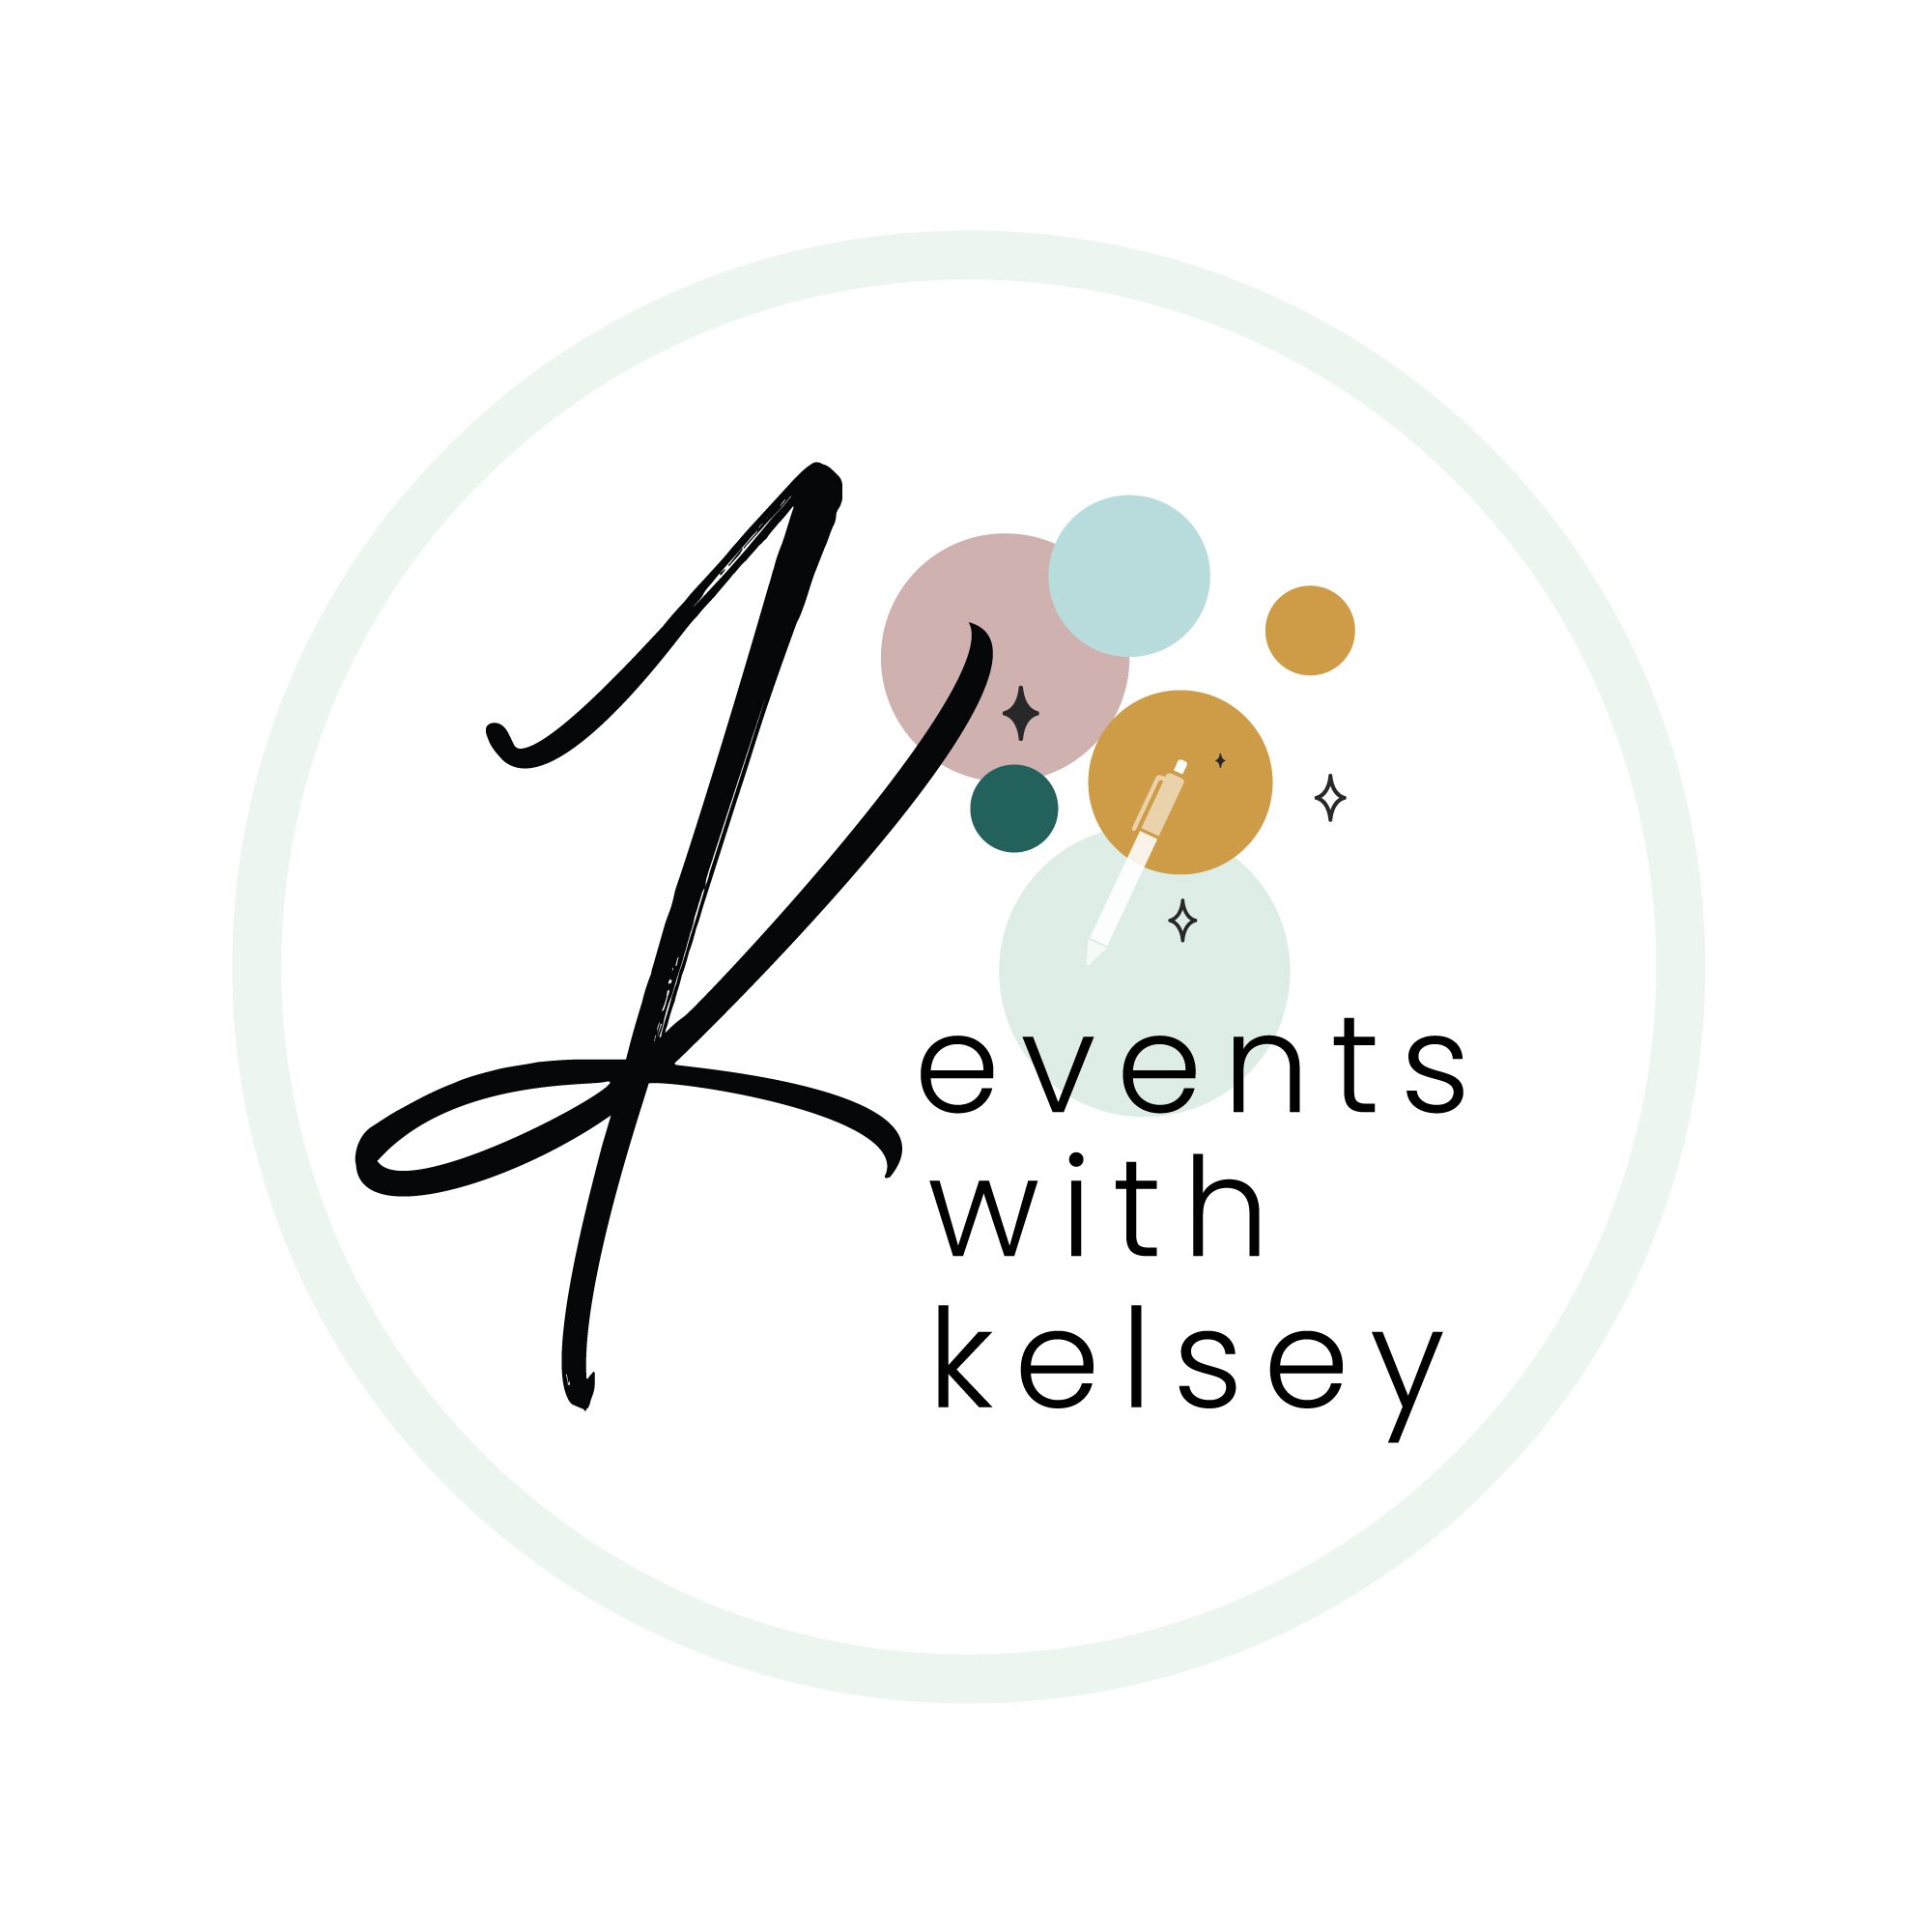 events-with-kelsey-1-WEB.jpg